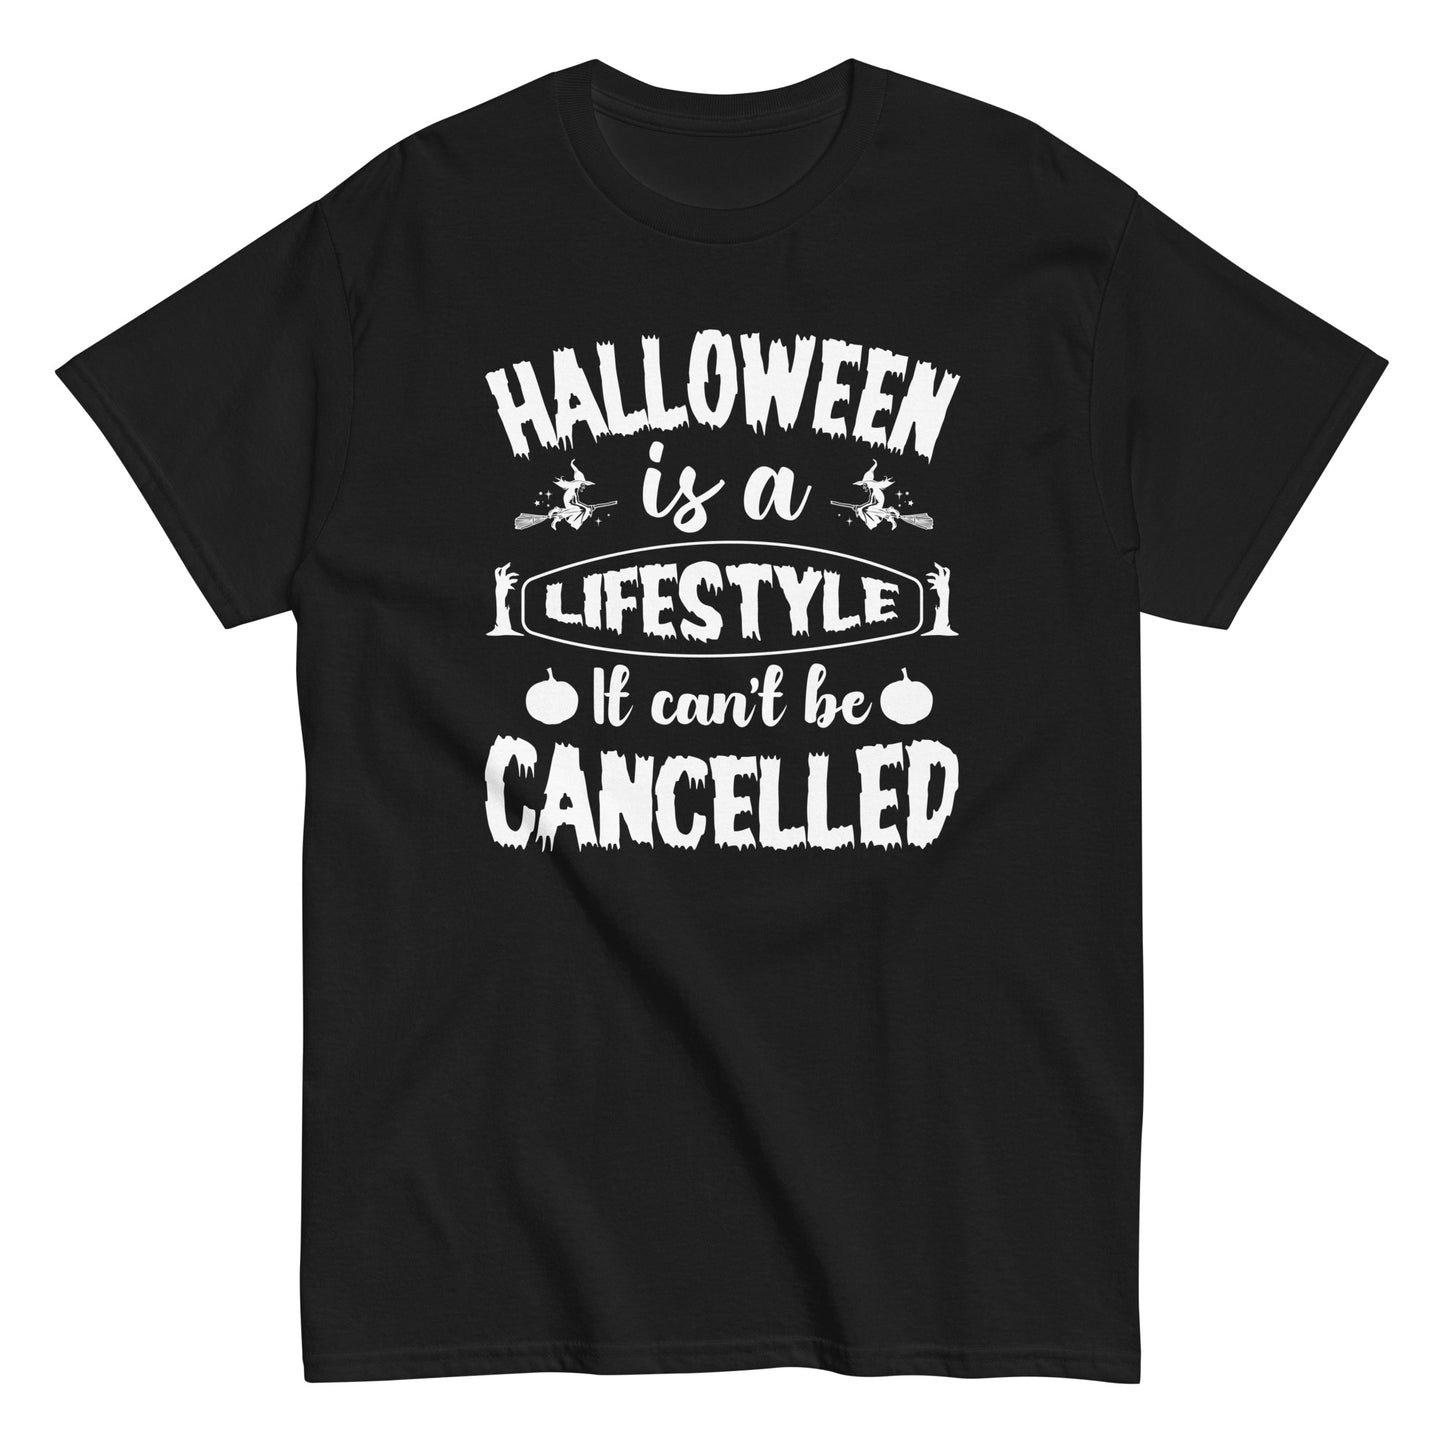 Halloween, More Than a Day, a Lifestyle Tee